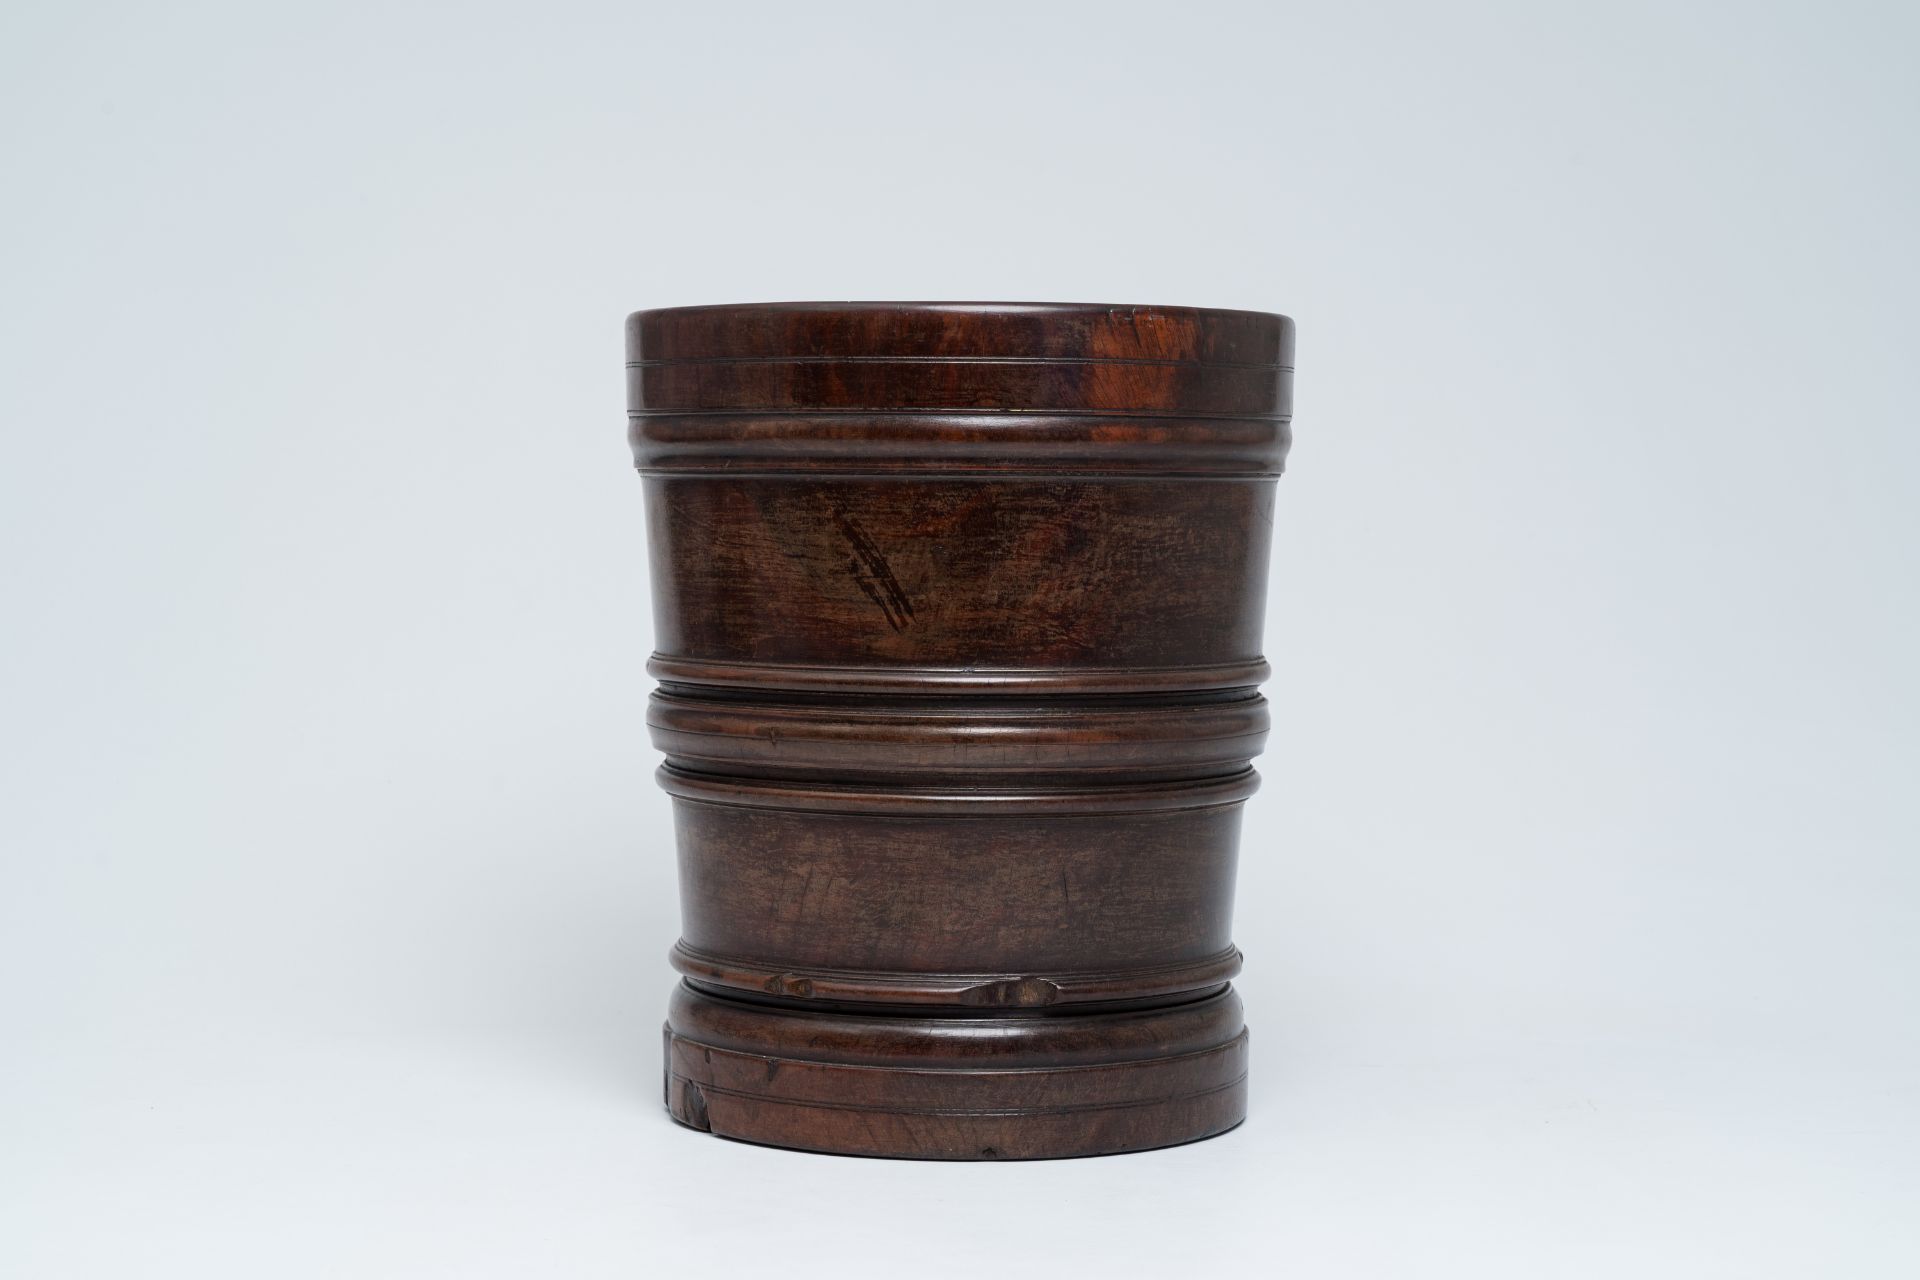 A large English turned wood mortar and pestle, second half 17th C. - Image 4 of 12